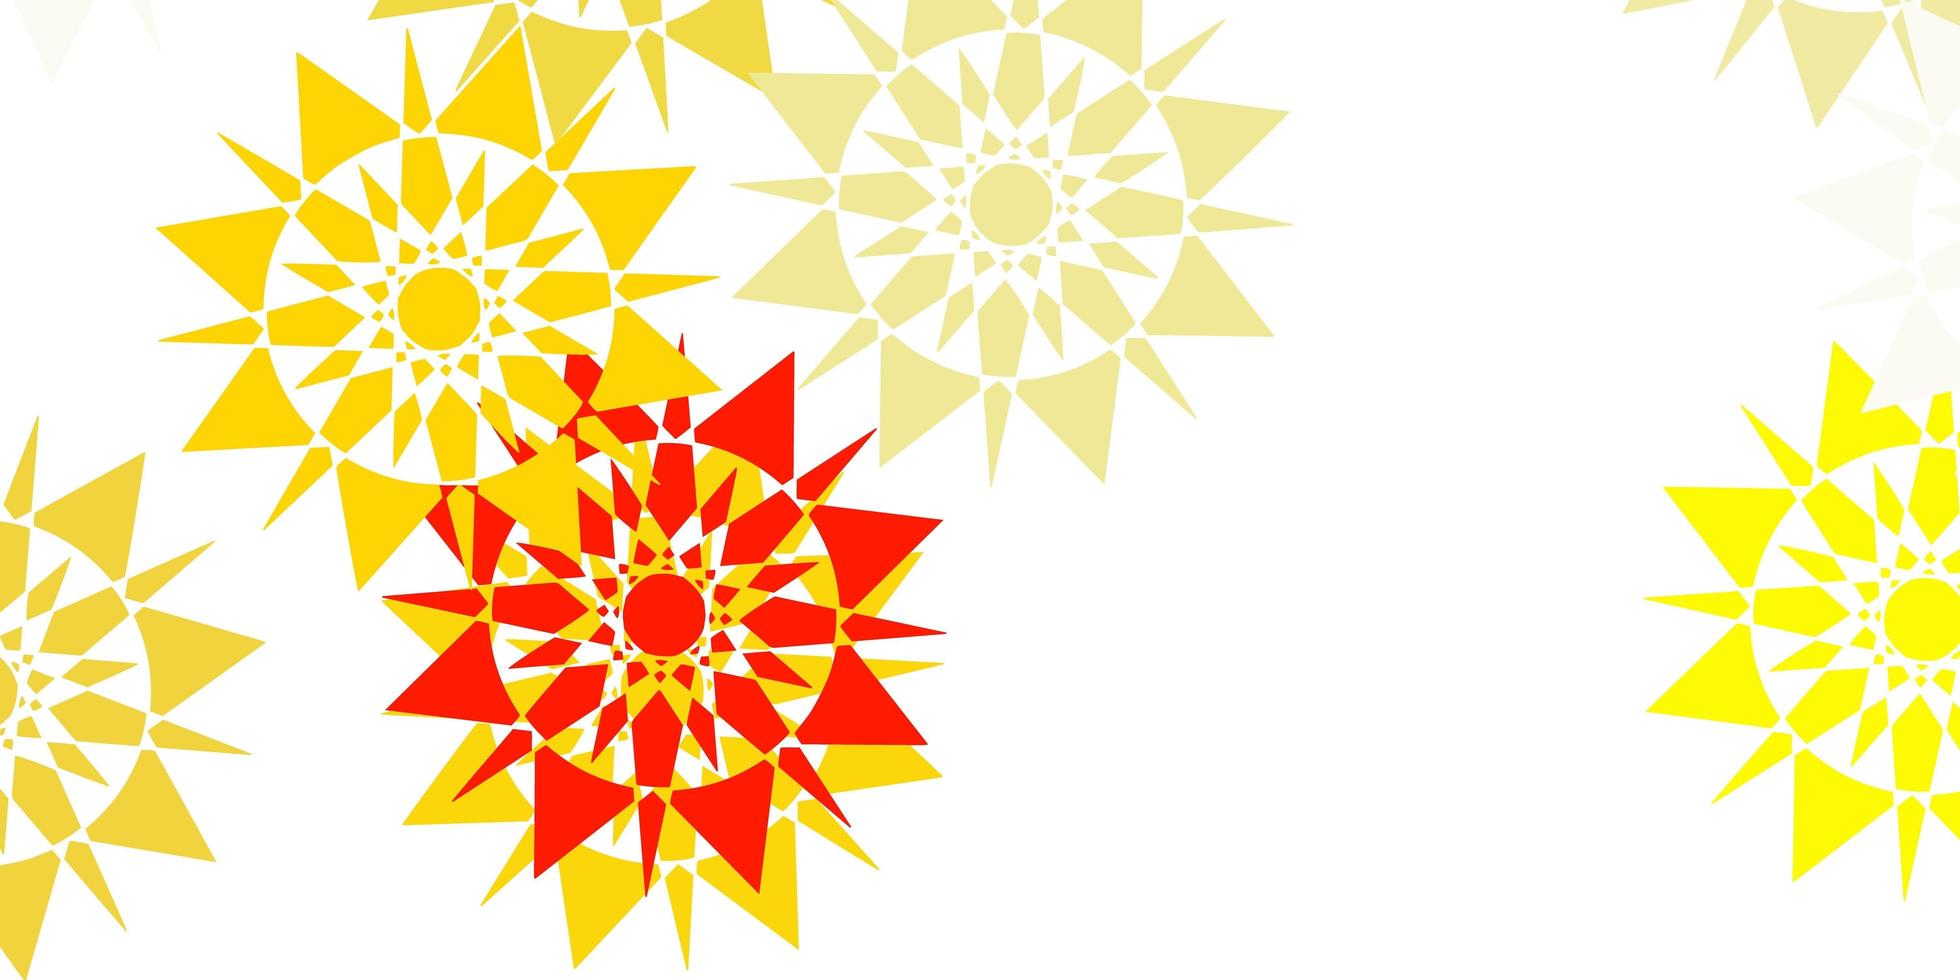 White Background with Yellow, Red Snowflakes vector